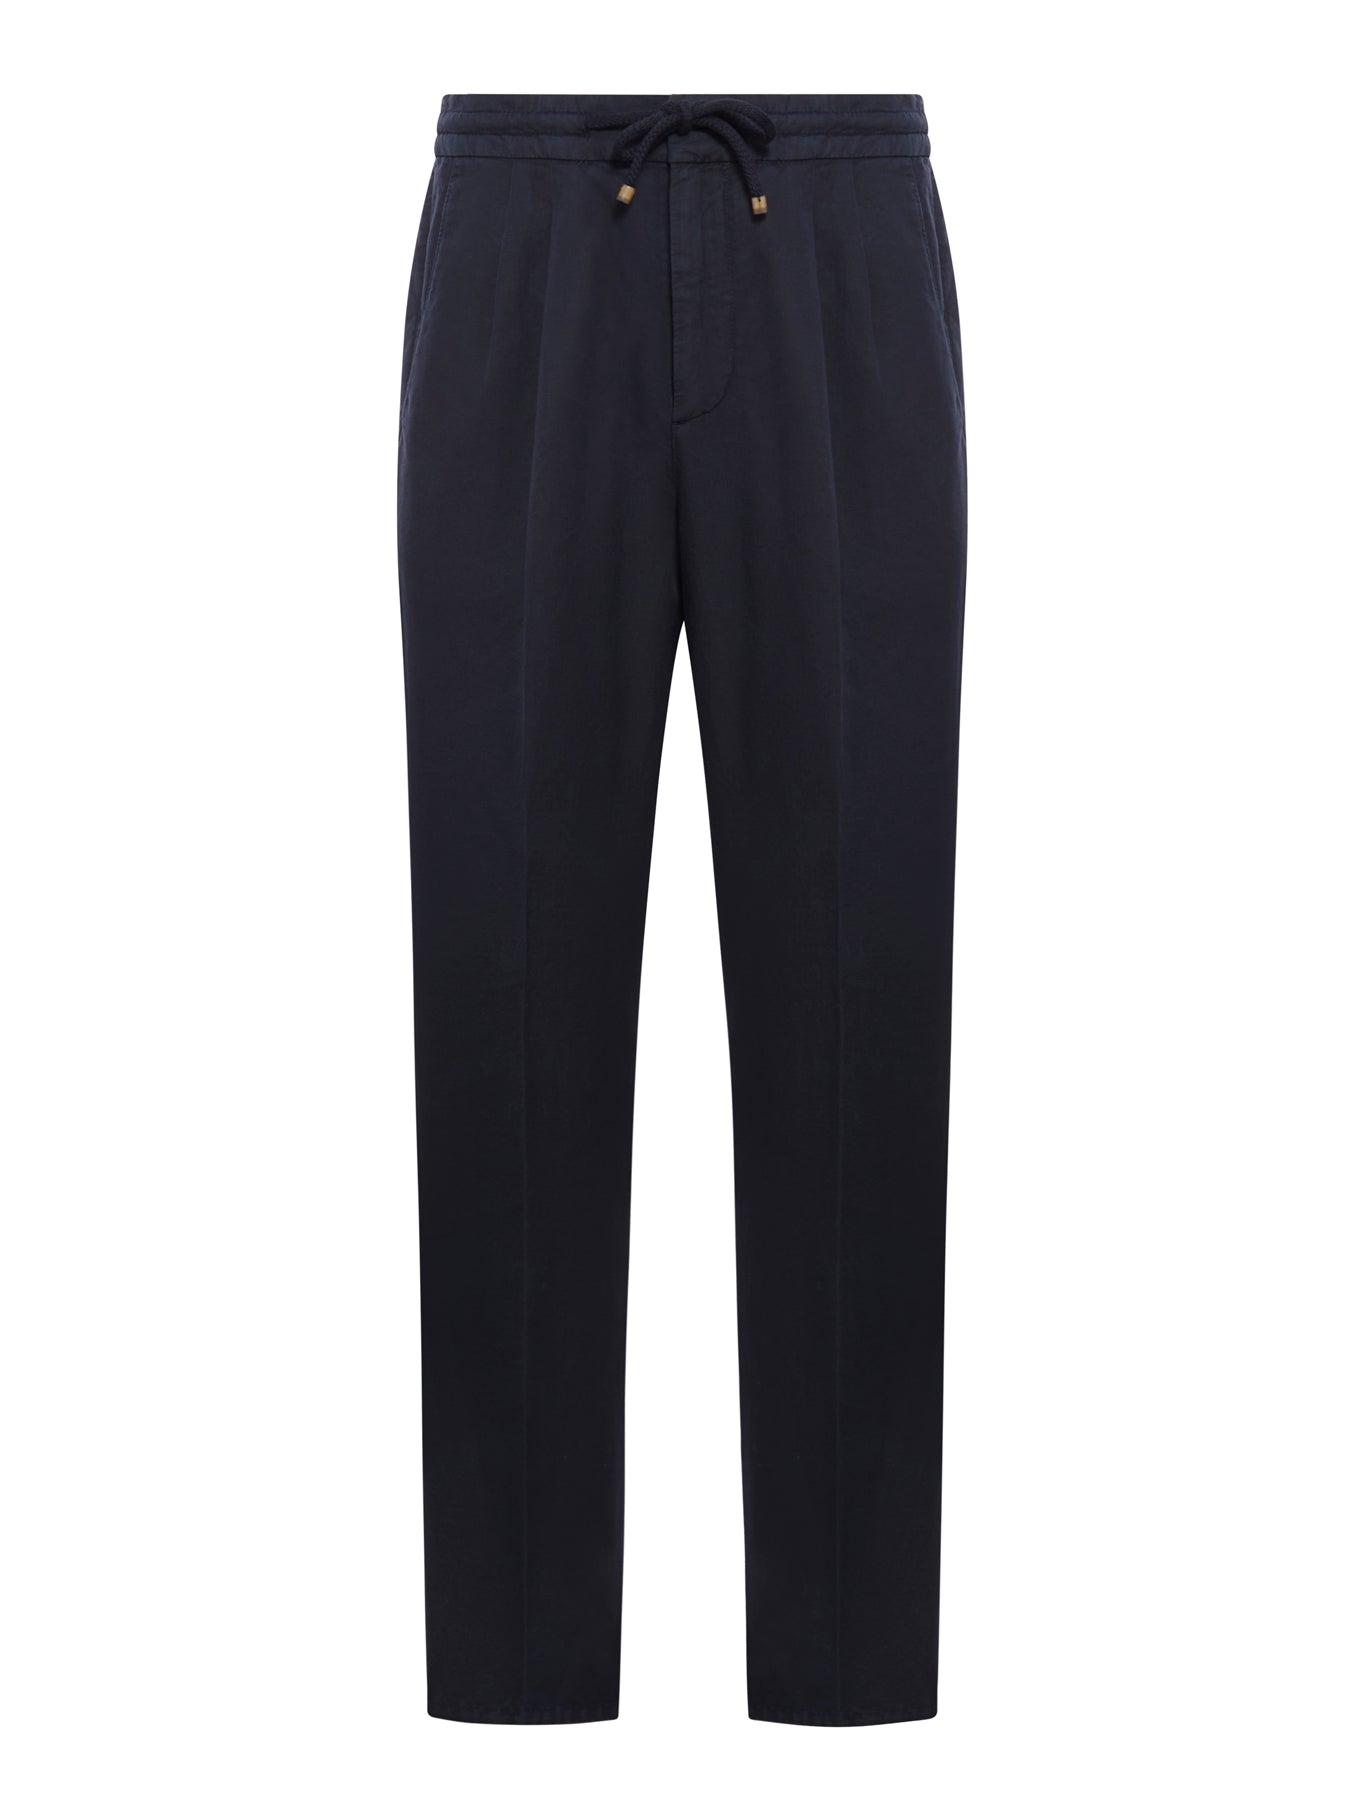 Trousers with drawstring waist